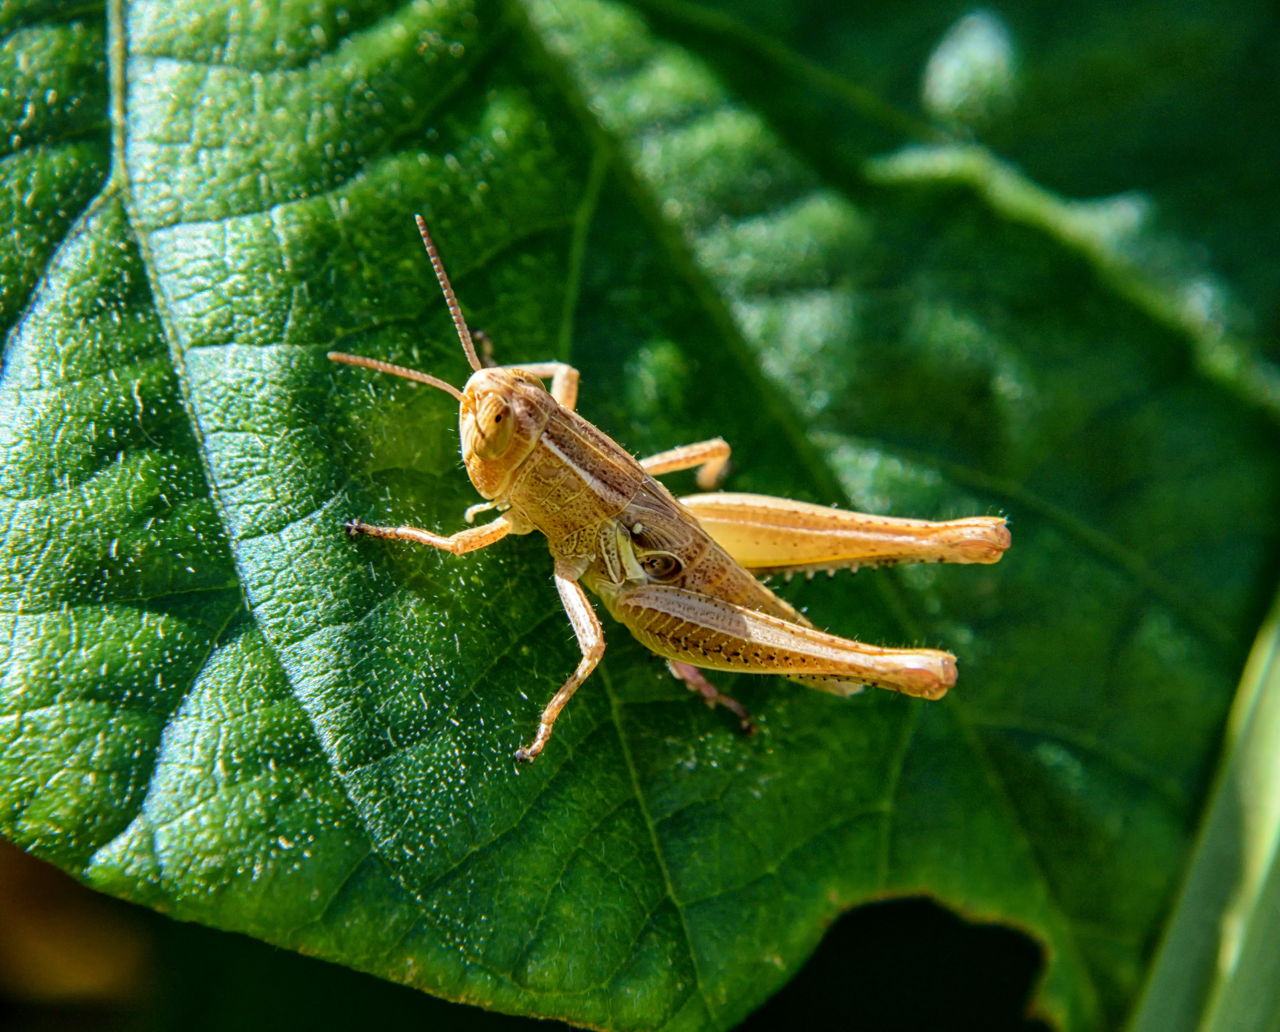 Facts about Grasshoppers